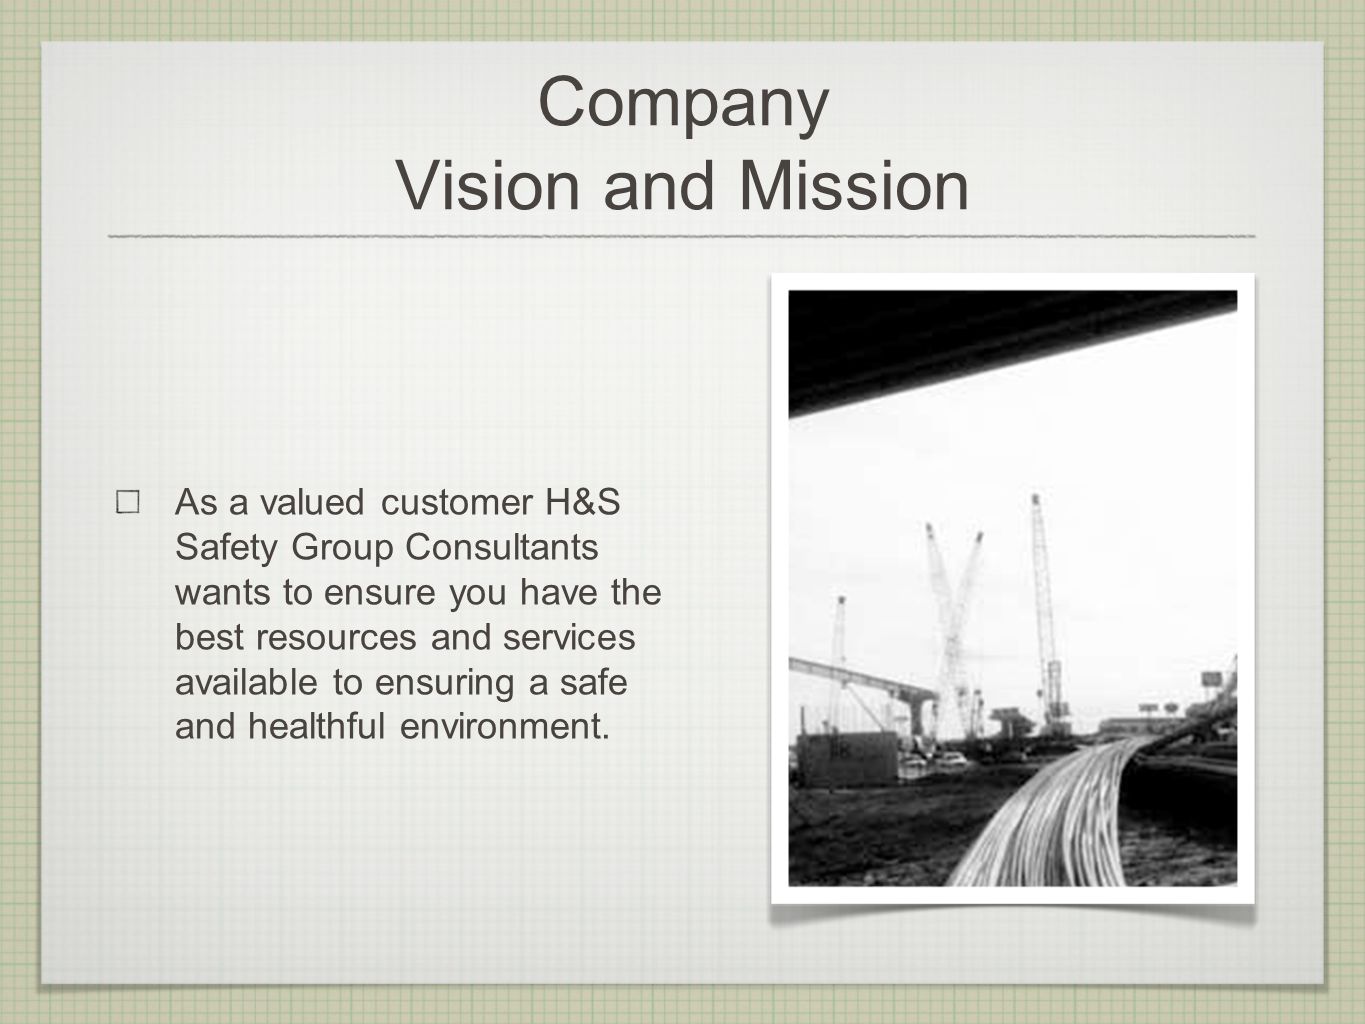 Company Vision and Mission As a valued customer H&S Safety Group Consultants wants to ensure you have the best resources and services available to ensuring a safe and healthful environment.